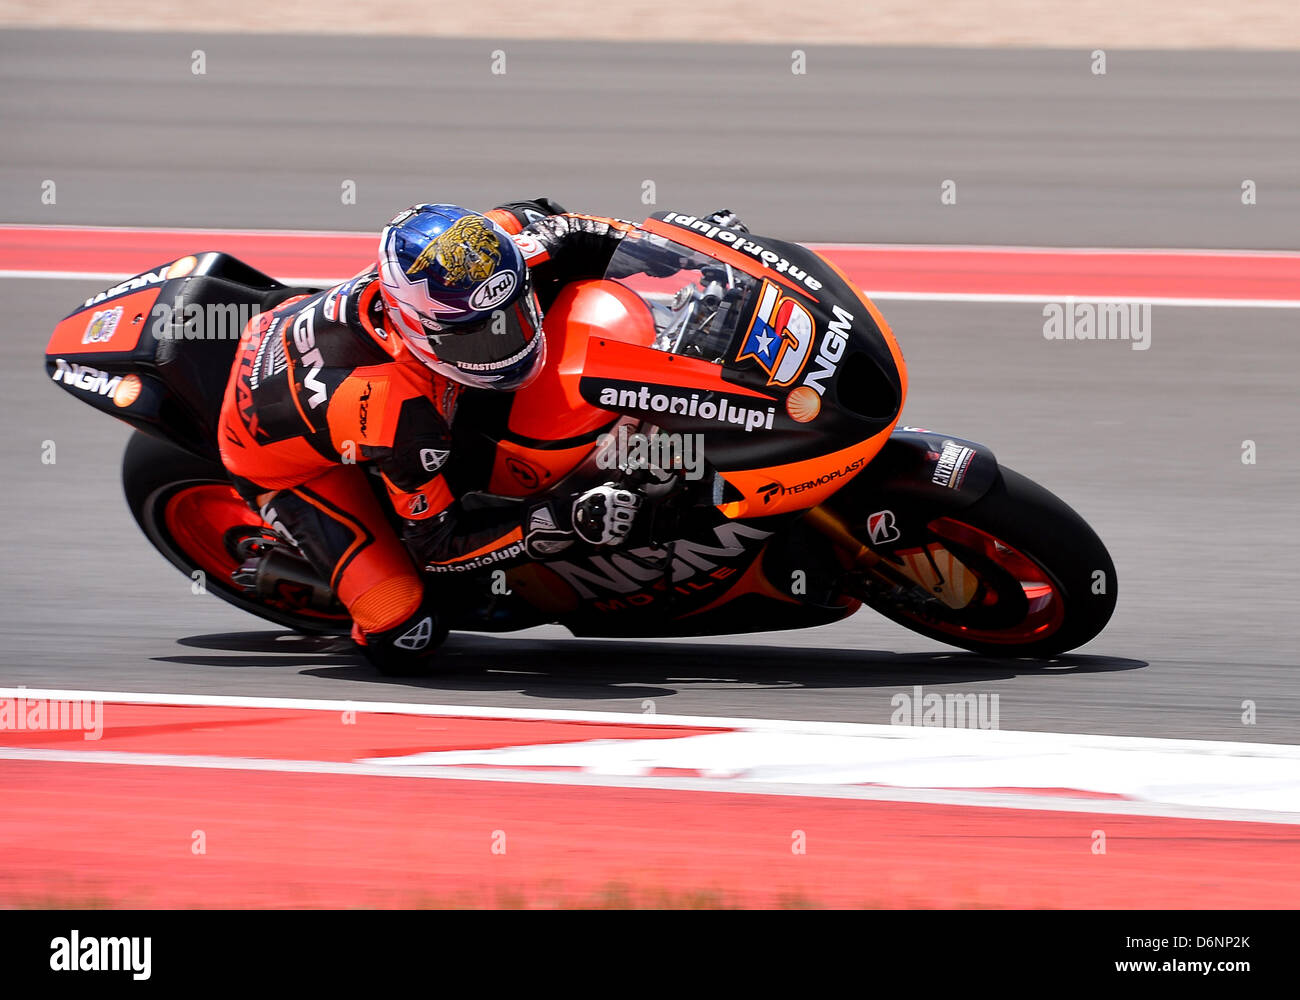 Austin, Texas, USA. 21st April, 2013. Colin Edwards #5 of NGM Mobile Forward Racing during MotoGP final on day three of Red Bull Grand Prix of the Americas at Circuit of the Americas in Austin, TX. Stock Photo